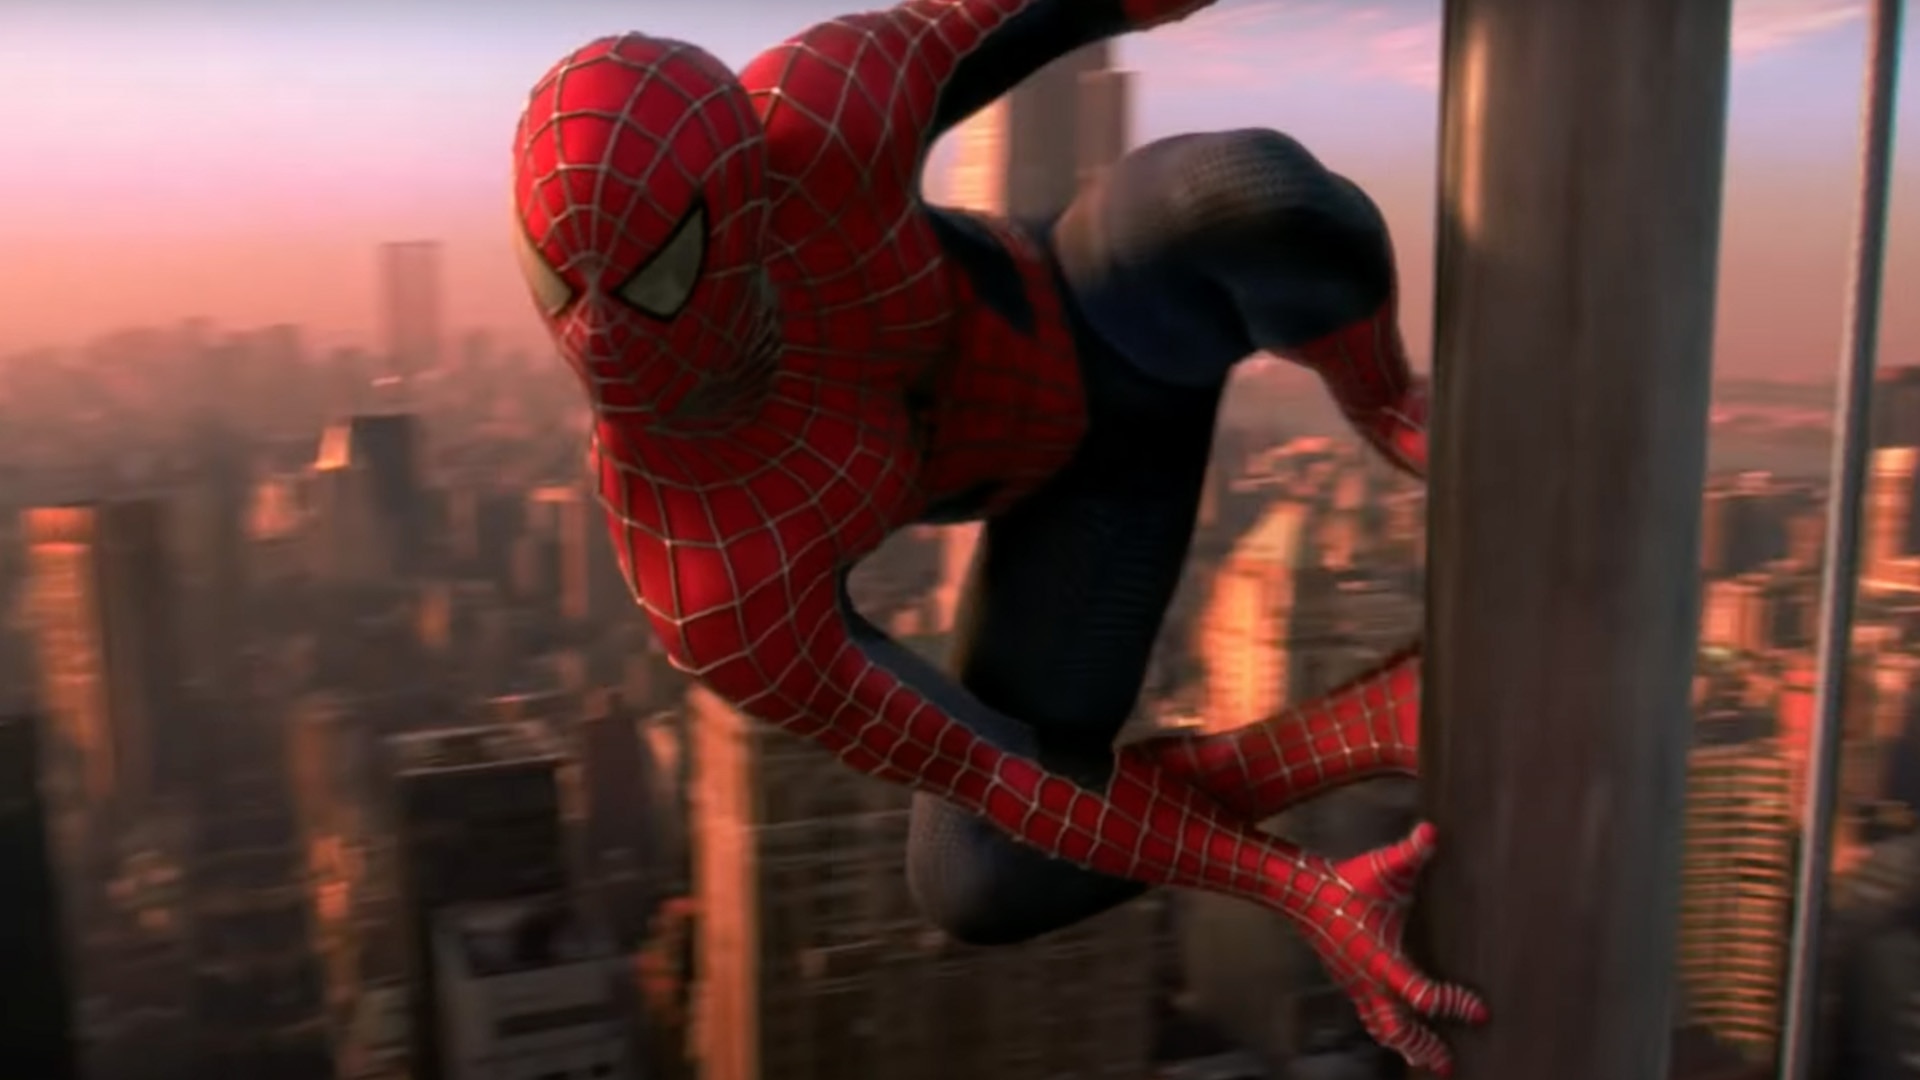 In ‘Spider-Man,’ you don’t need to worry about how Spidey gets his costume